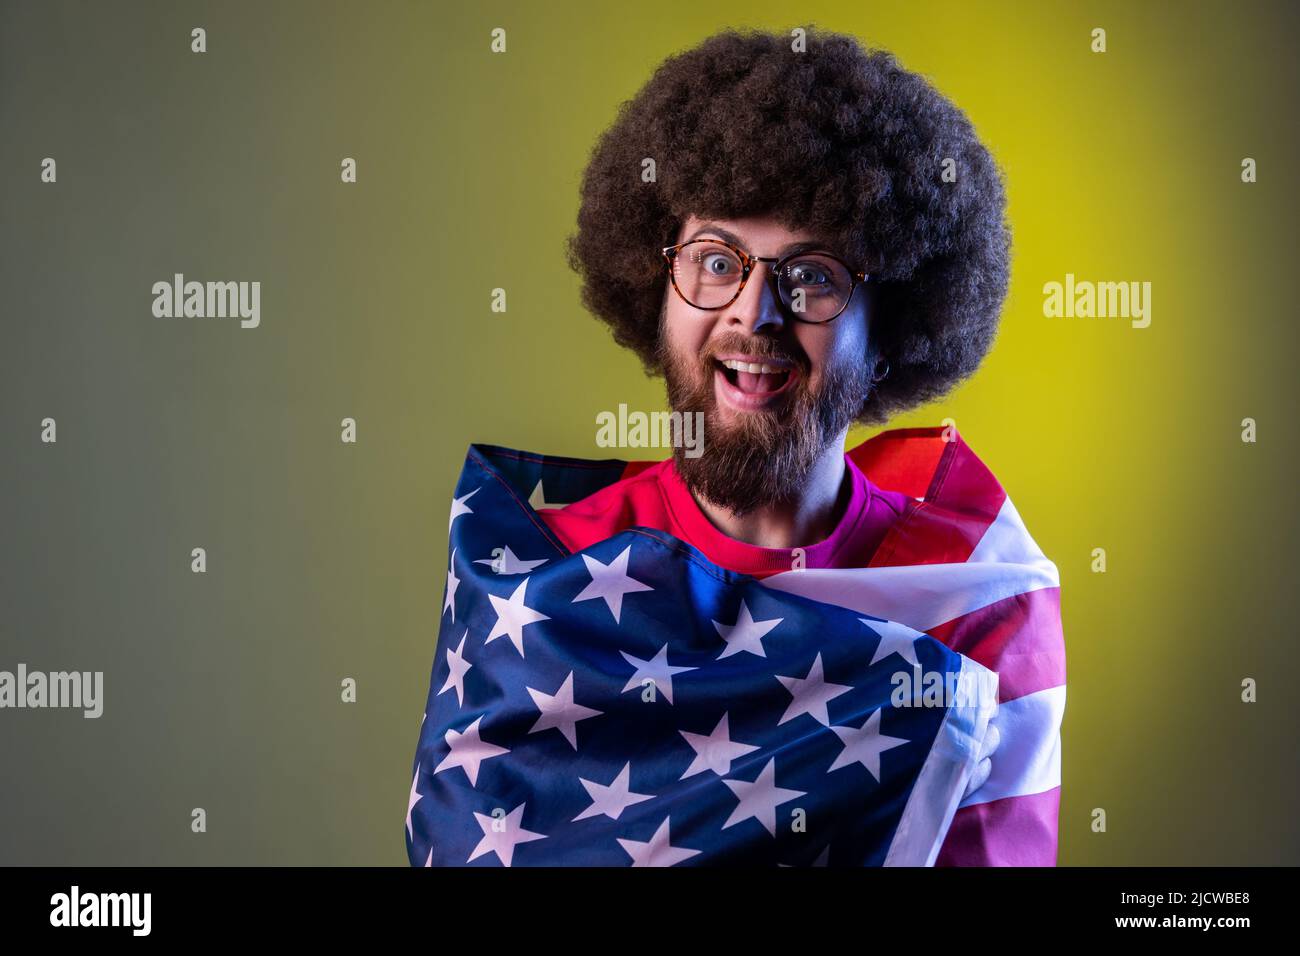 Portrait of hipster man standing wrapped in american flag, looking at camera with amazed excited facial expression. Indoor studio shot isolated on colorful neon light background. Stock Photo